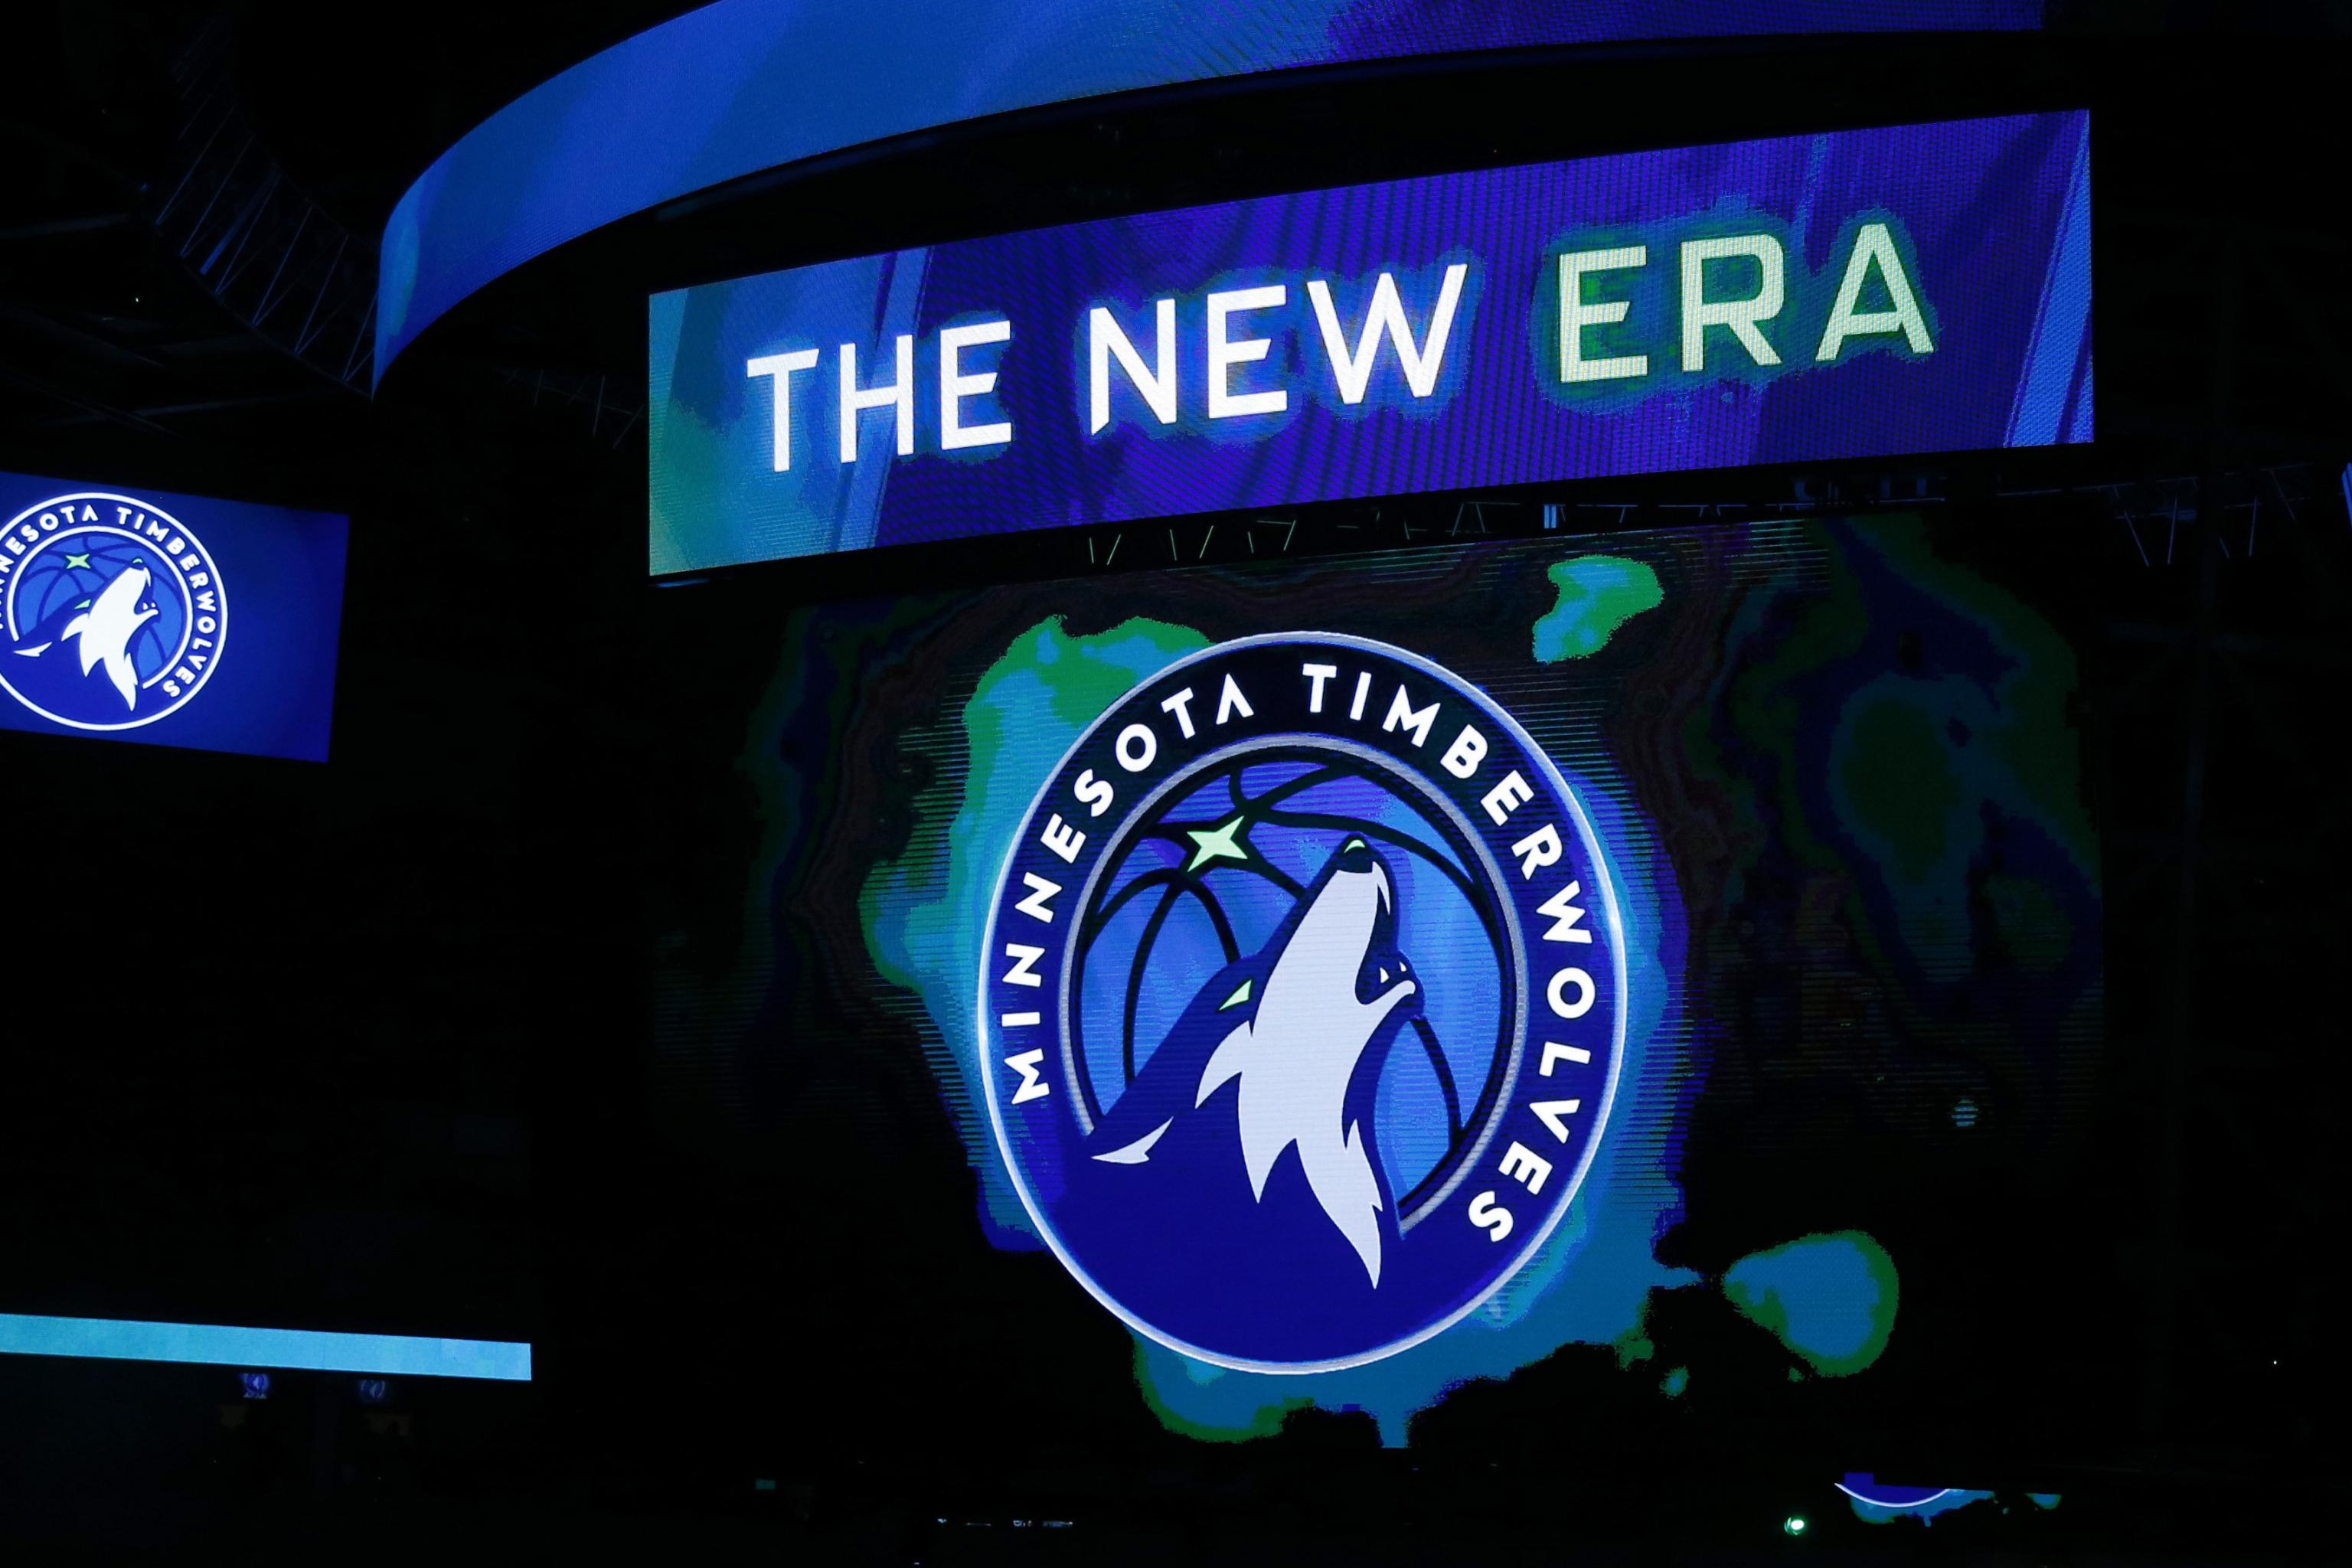 T'Wolves find patch sponsor in security firm Aura